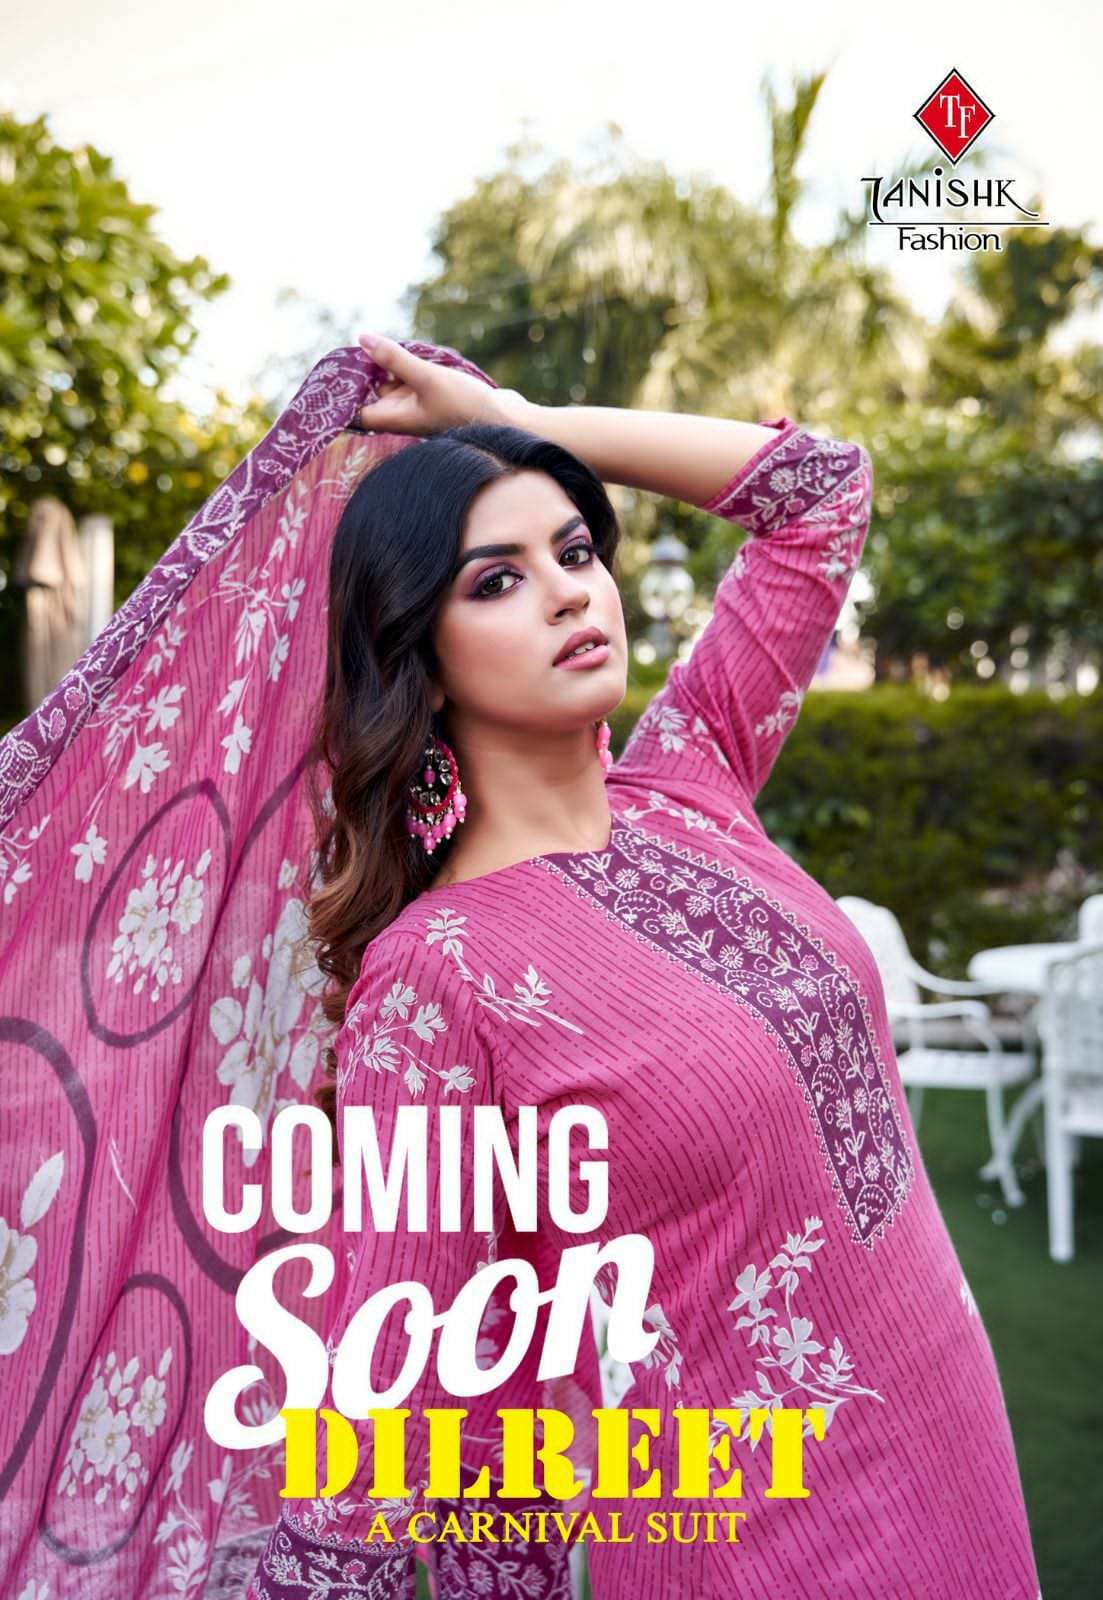 TANISHK FASHION DILREET CARNIVAL SUIT DESIGNER COTTON PRINTED LOW RANGE SUITS IN BEST WHOLESALE RATE